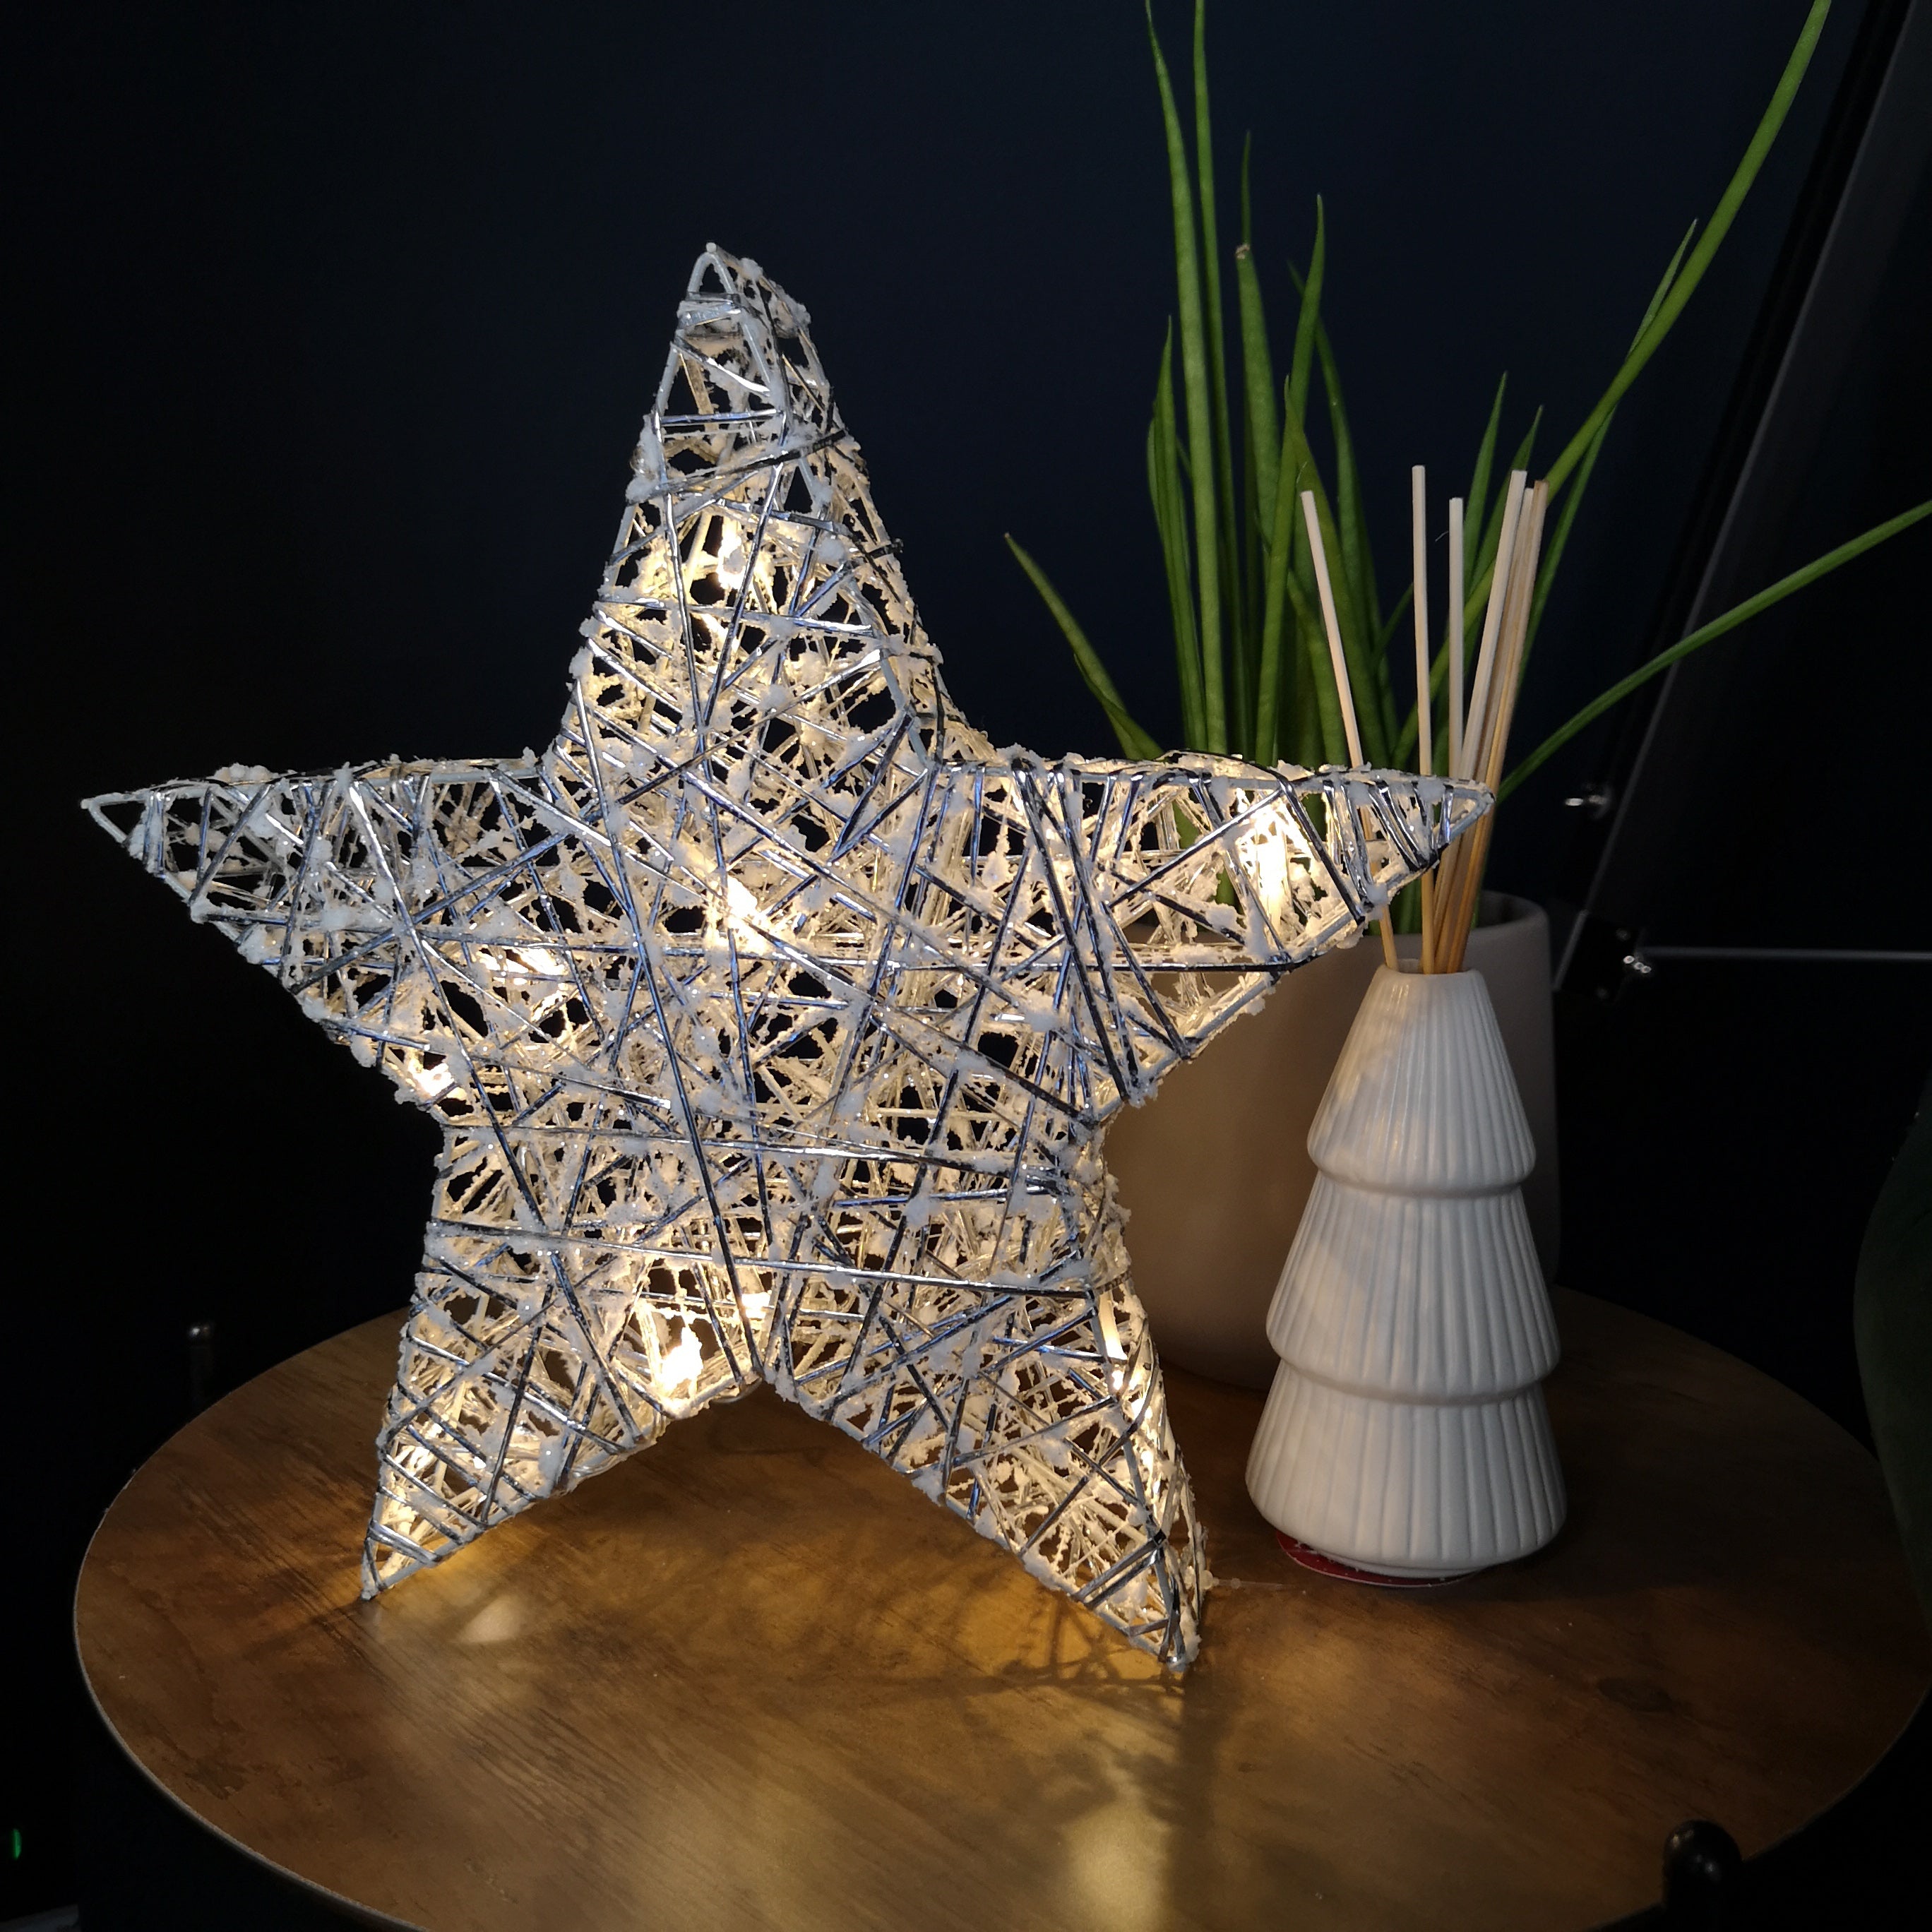 30cm Battery Operated Silver Star Christmas Decoration with 10 Warm White LEDs